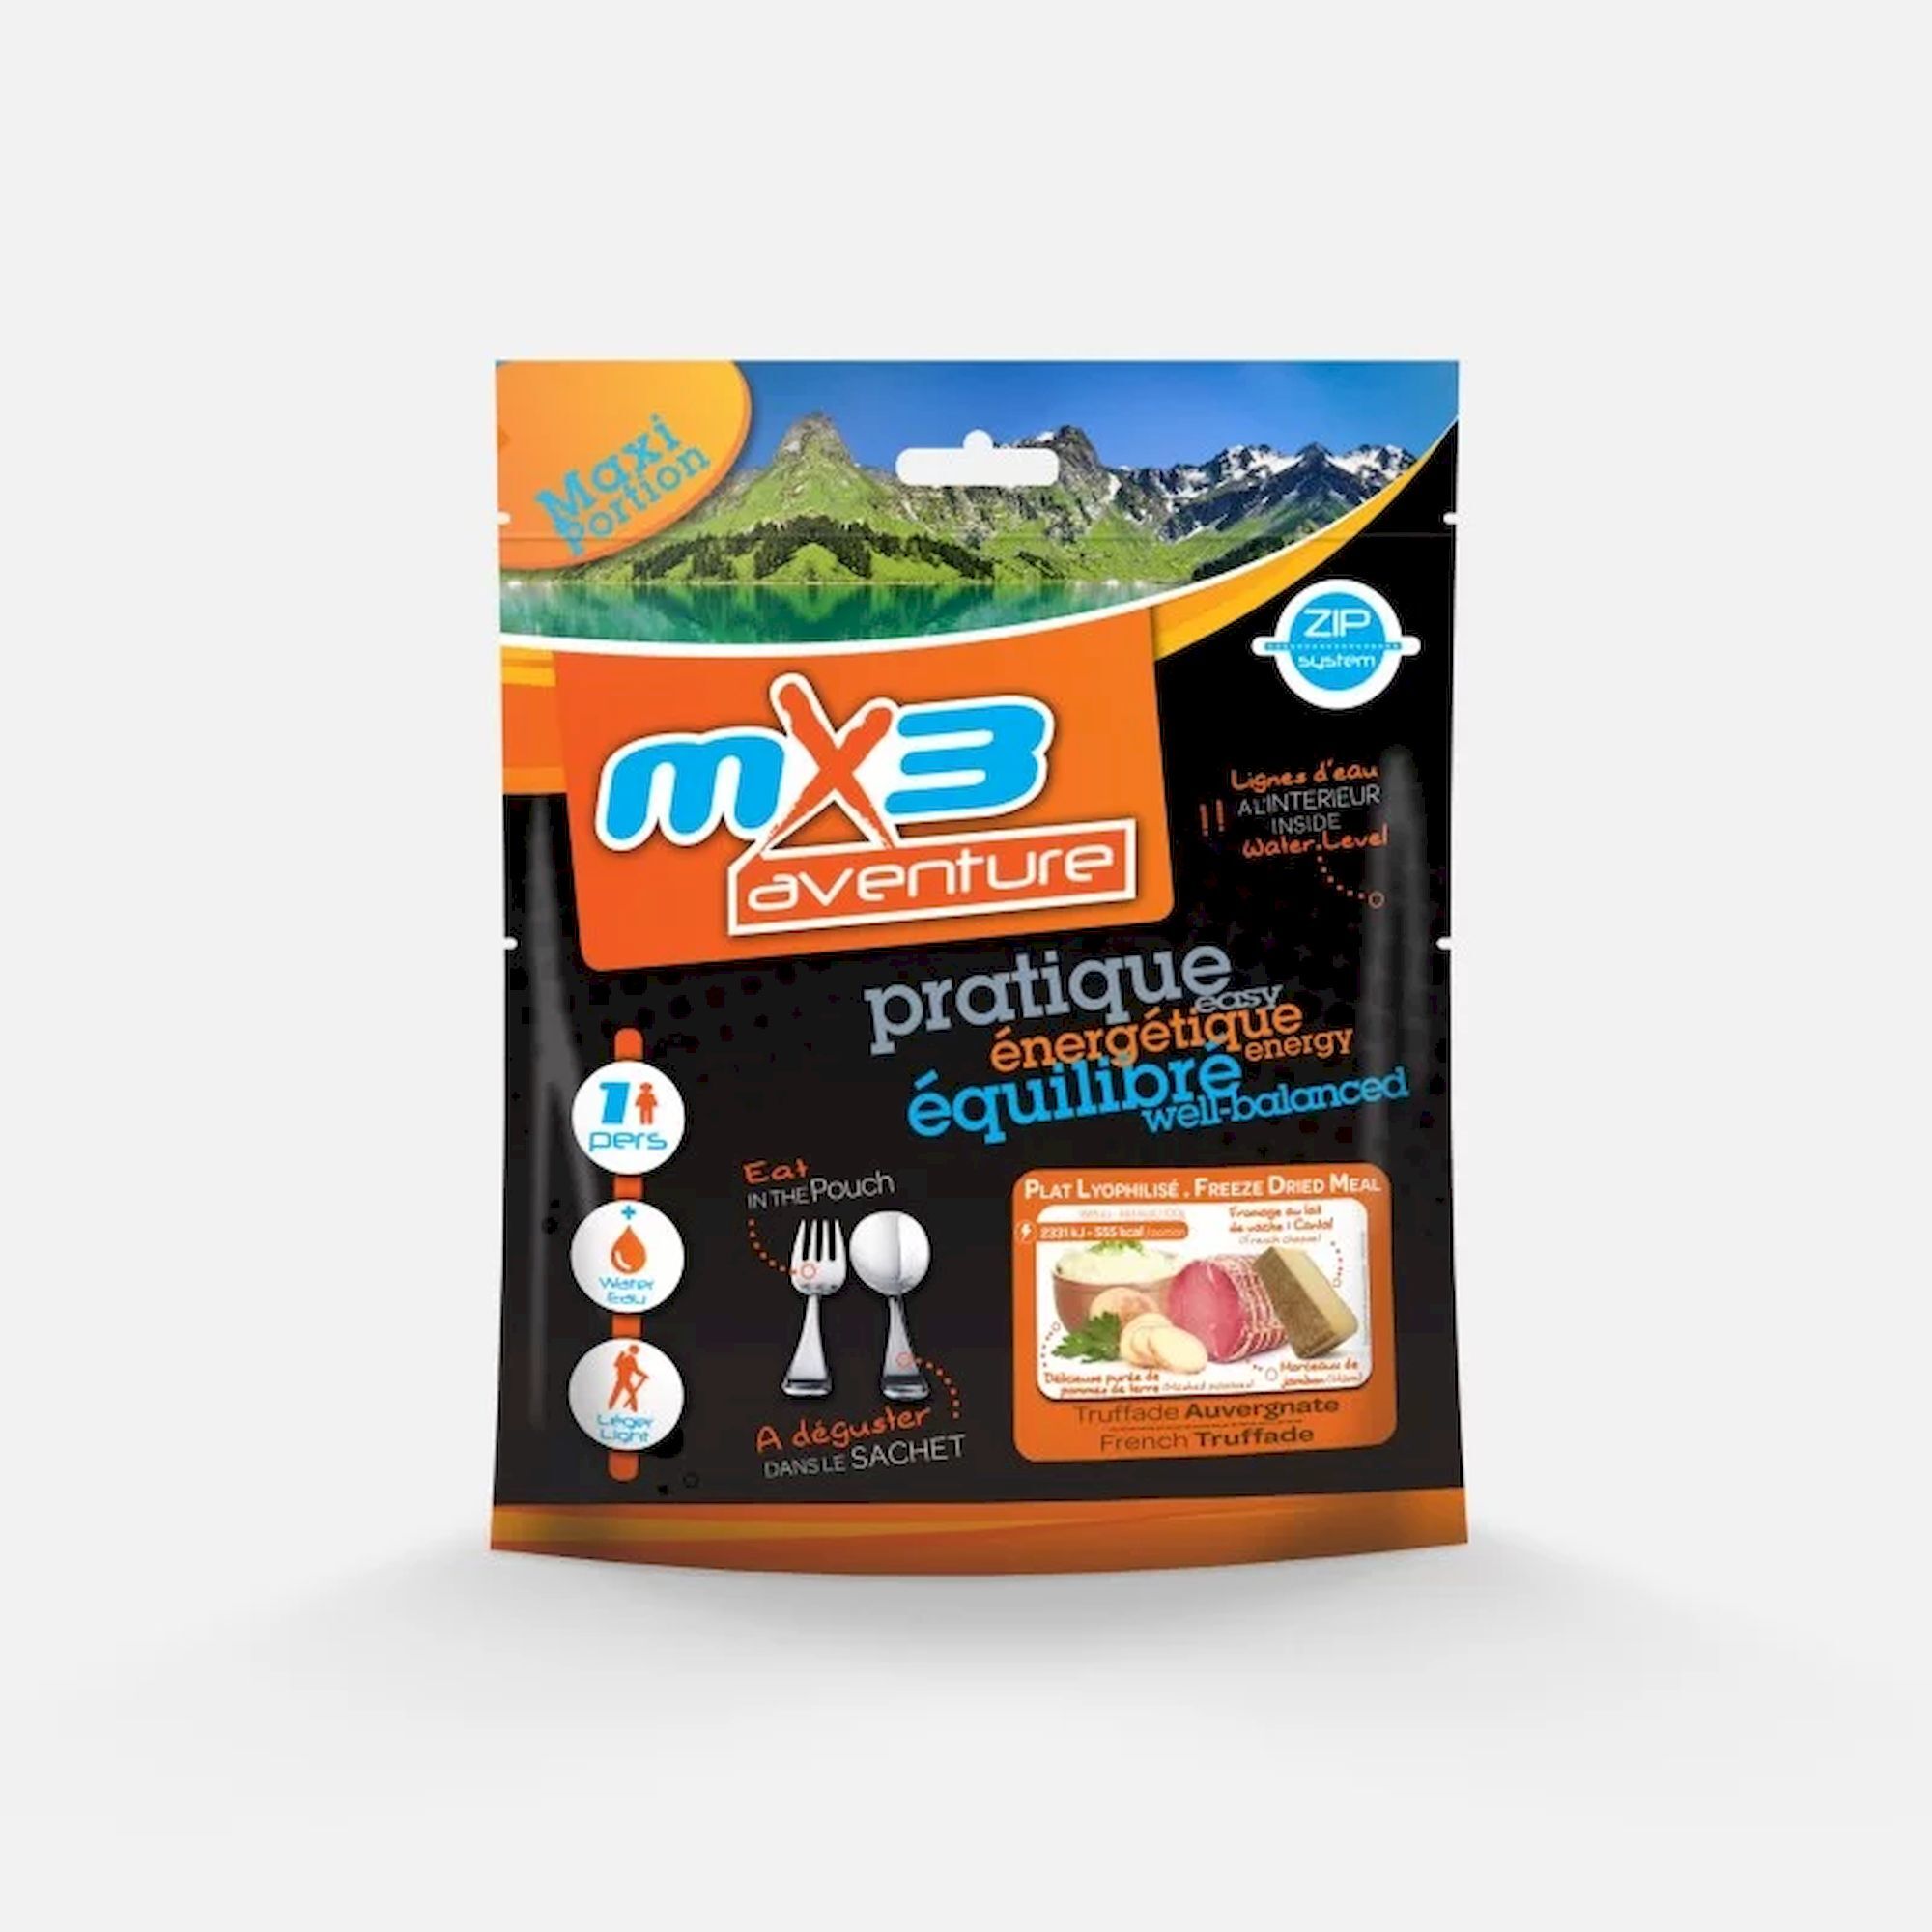 Mx3 Nutrition French Truffade (Potatoes and Cantal cheese) - Hautgerichte | Hardloop